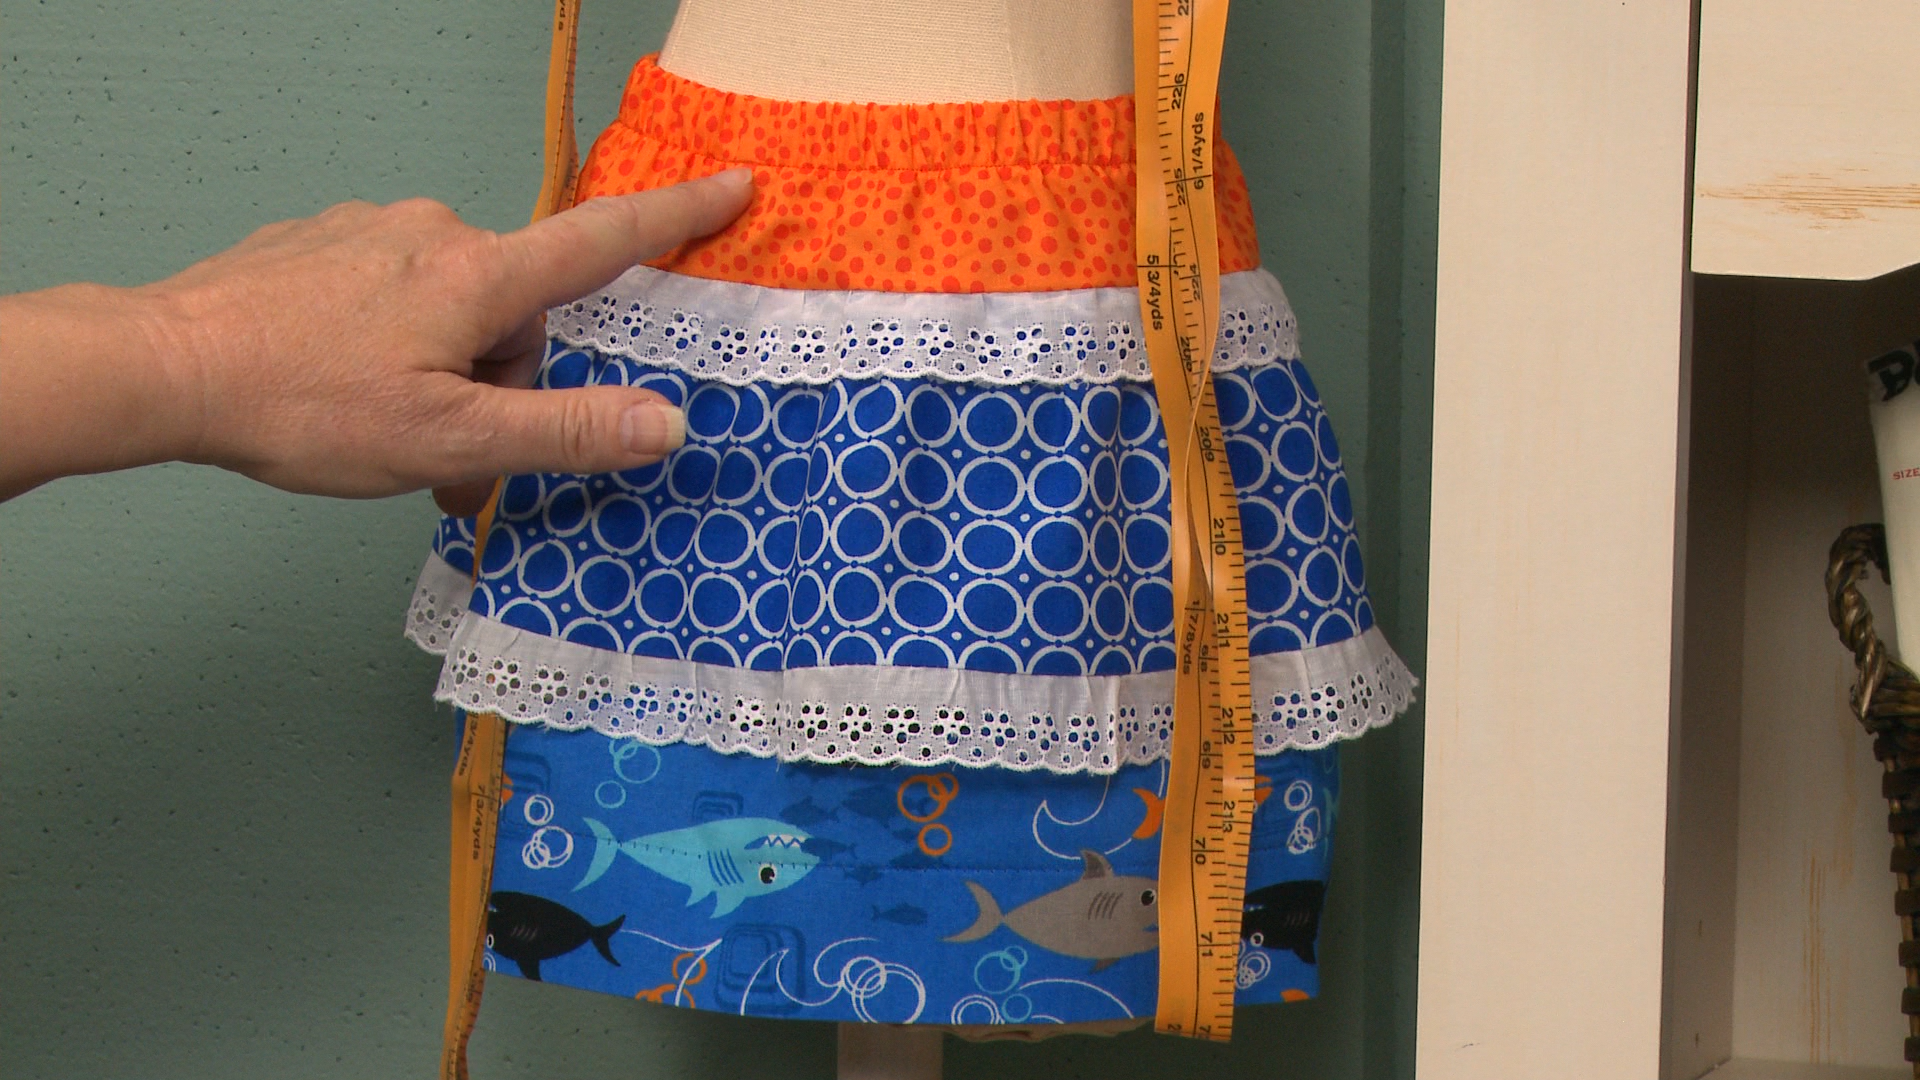 Session 4: Project: Toddler’s Layered Skirt